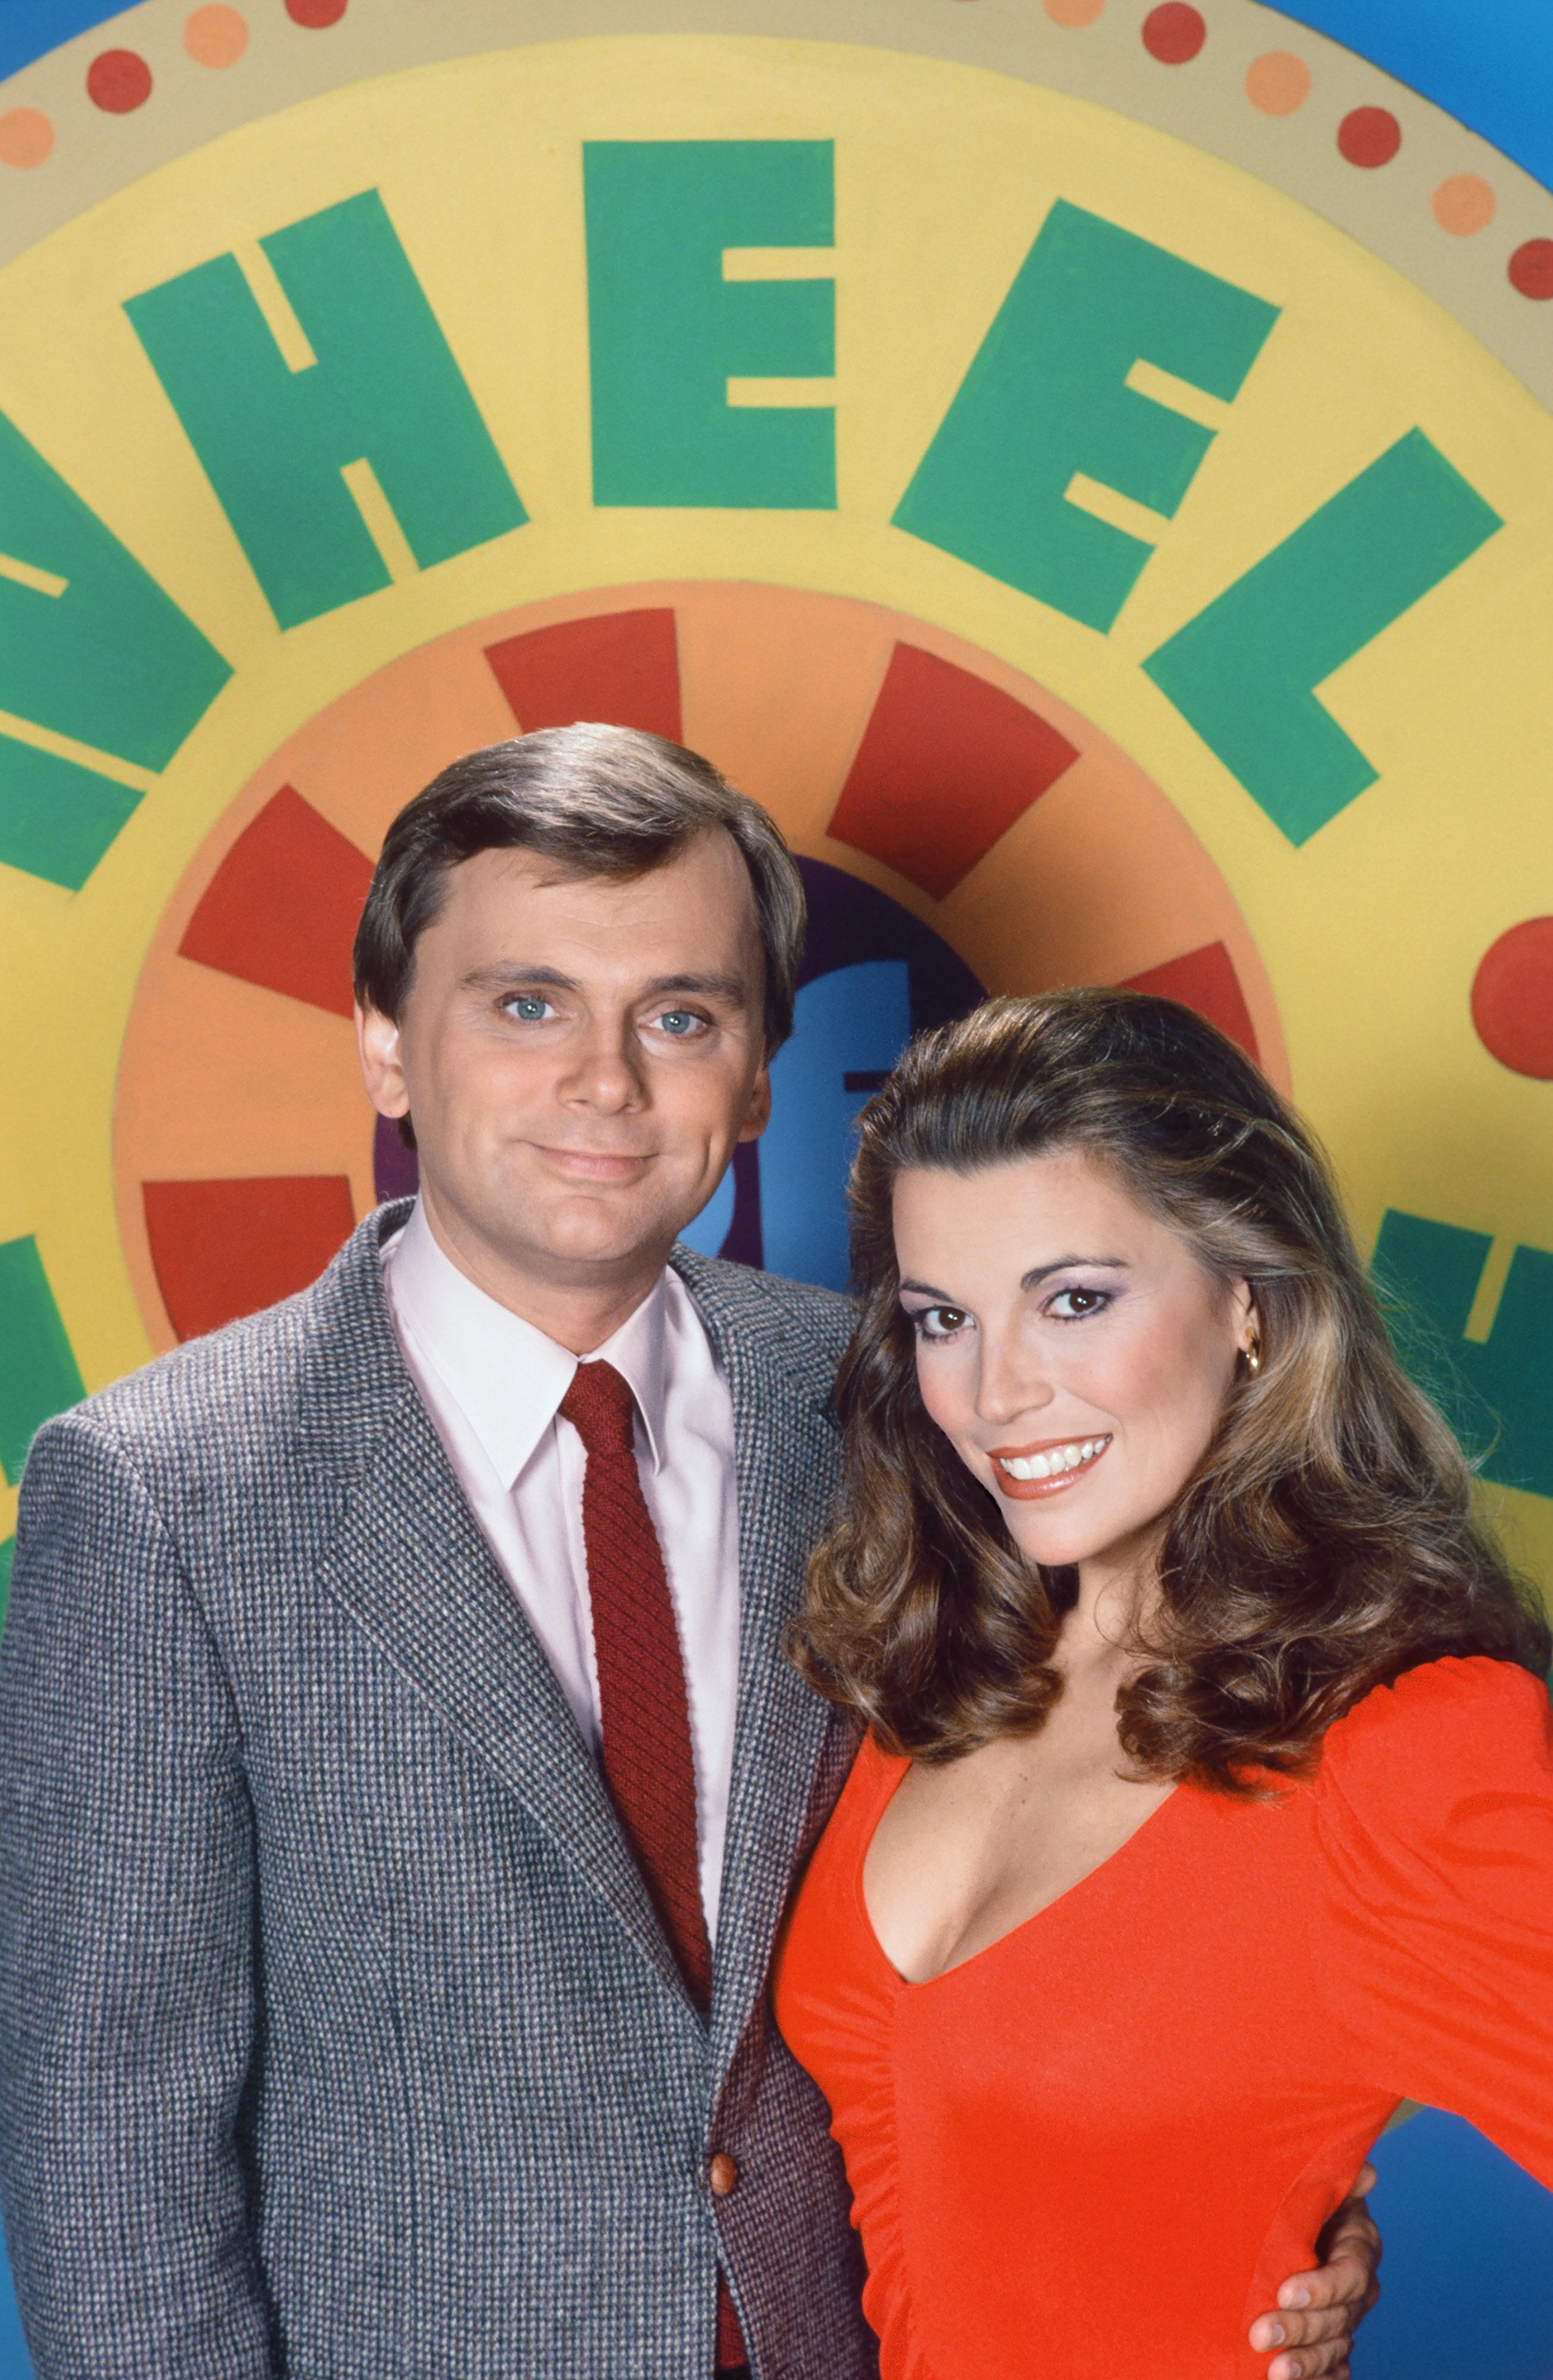 Pat Sajak and Vanna White on "Wheel of Fortune" | Source: Getty Images